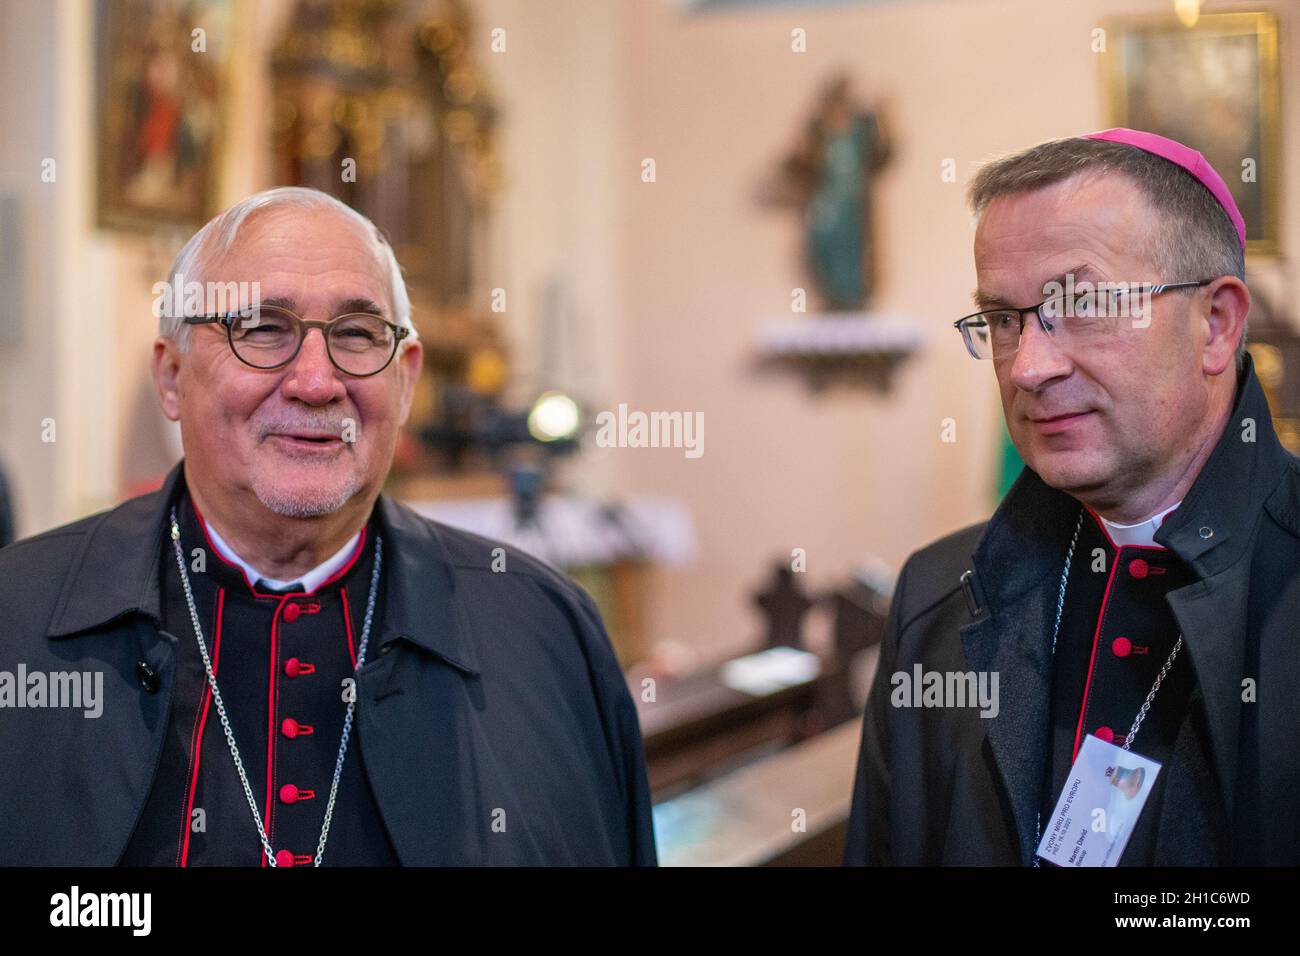 A bell the Nazis seized in Pist, north Moravia,  returns to Czechia, October 16, 2021 as a symbol of peace within a project of bells' return which started in Grotzingen, Germany. At left is bishop of Rottenburg-Stuttgart Dr. Gebhard Furst.   (CTK Photo/Vladimir Prycek) Stock Photo